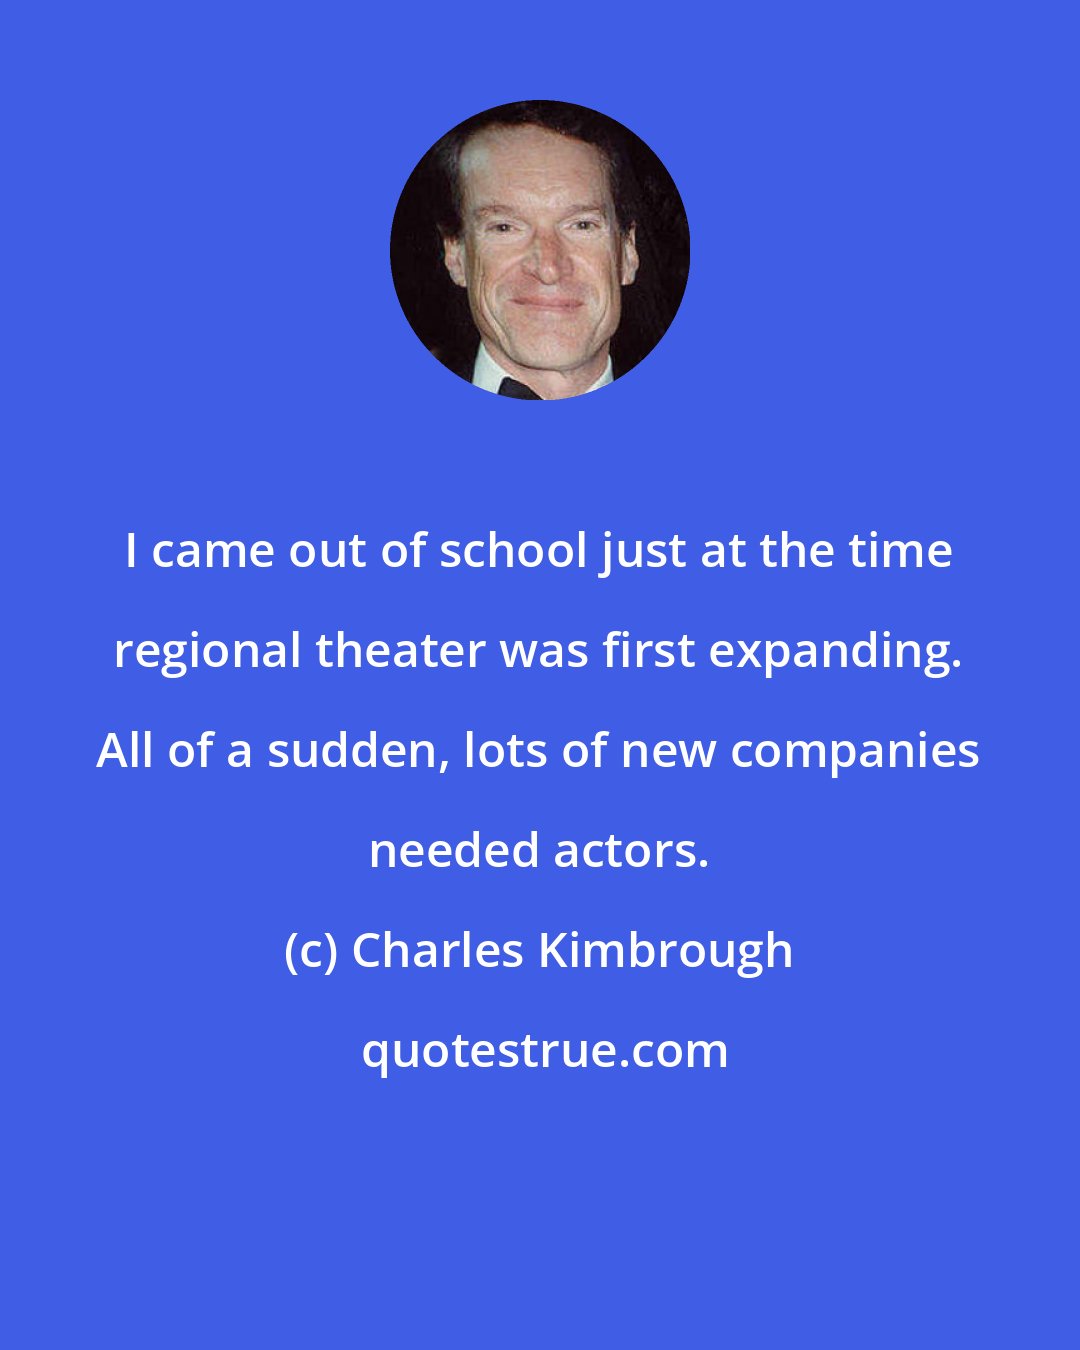 Charles Kimbrough: I came out of school just at the time regional theater was first expanding. All of a sudden, lots of new companies needed actors.